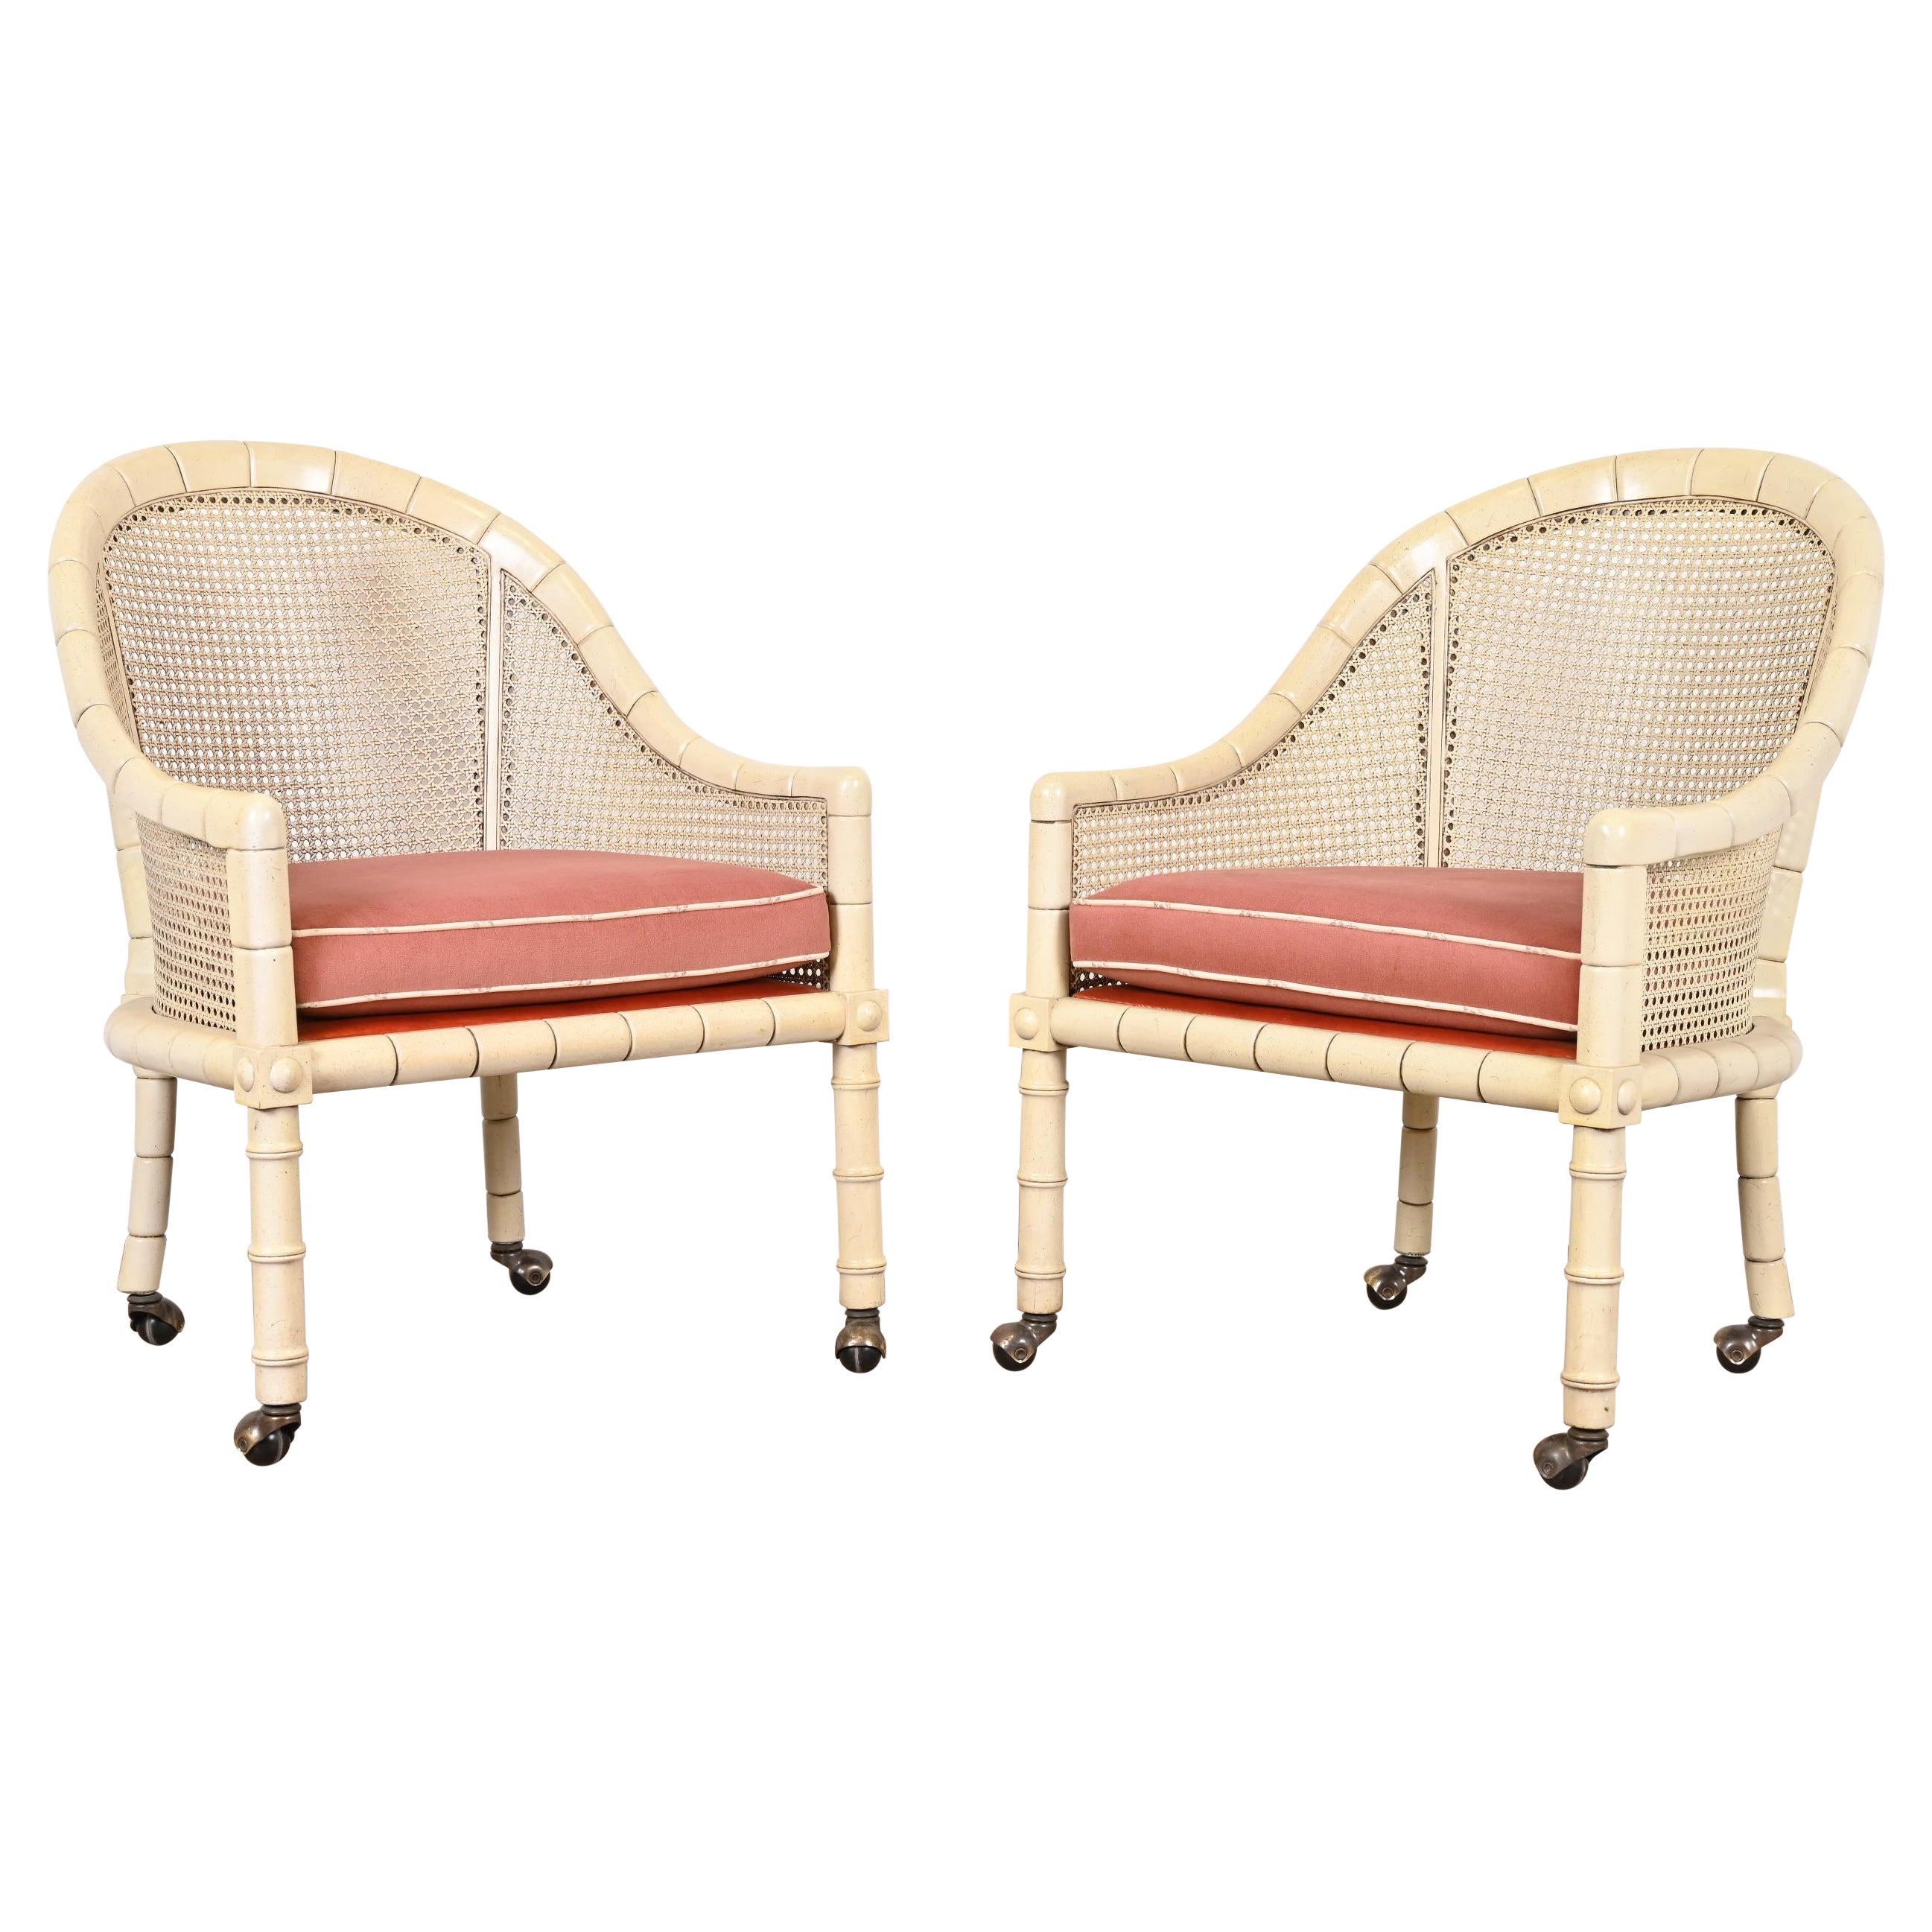 John Widdicomb Regency Faux Bamboo and Cane Club Chairs, Pair